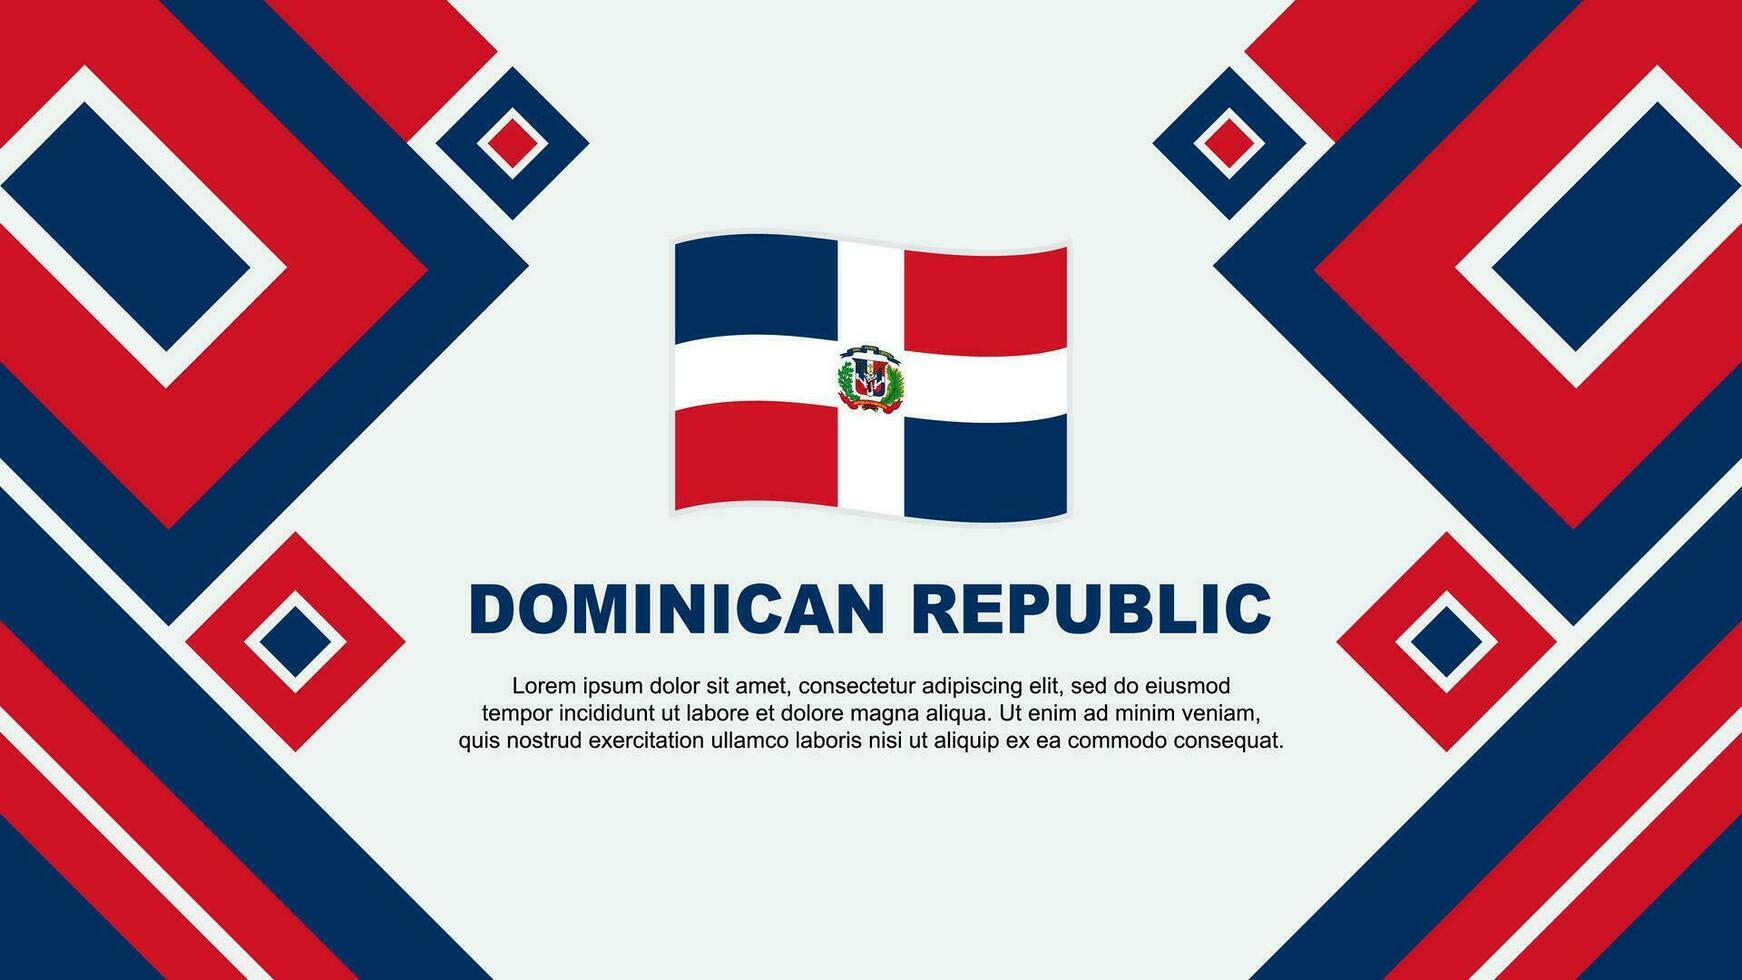 Dominican Republic Flag Abstract Background Design Template. Dominican Republic Independence Day Banner Wallpaper Vector Illustration. Dominican Republic Cartoon